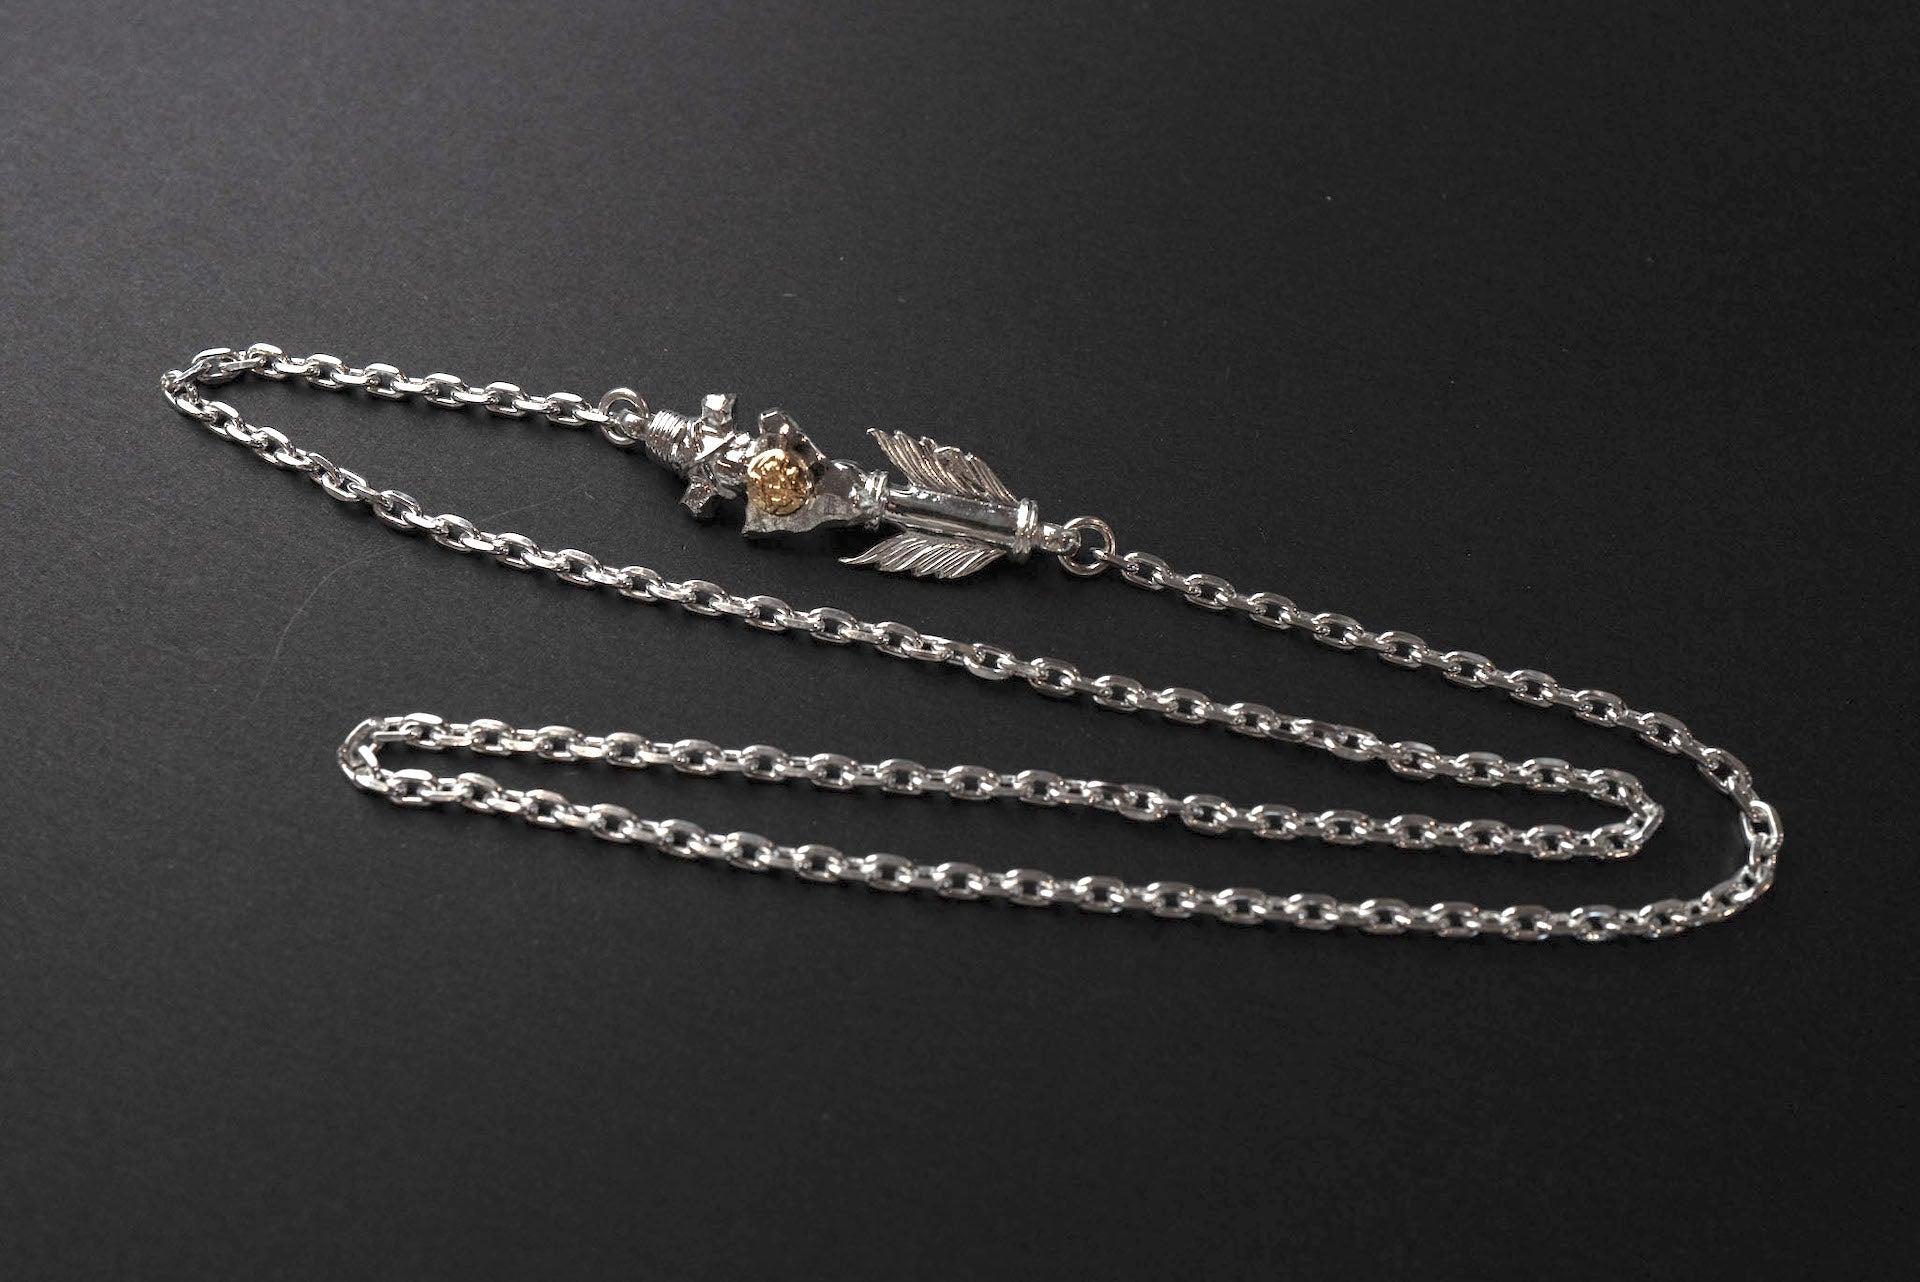 First Arrow's Size Small "Spirit Arrow" Silver Chain with 18K Gold Emblem (O-283)